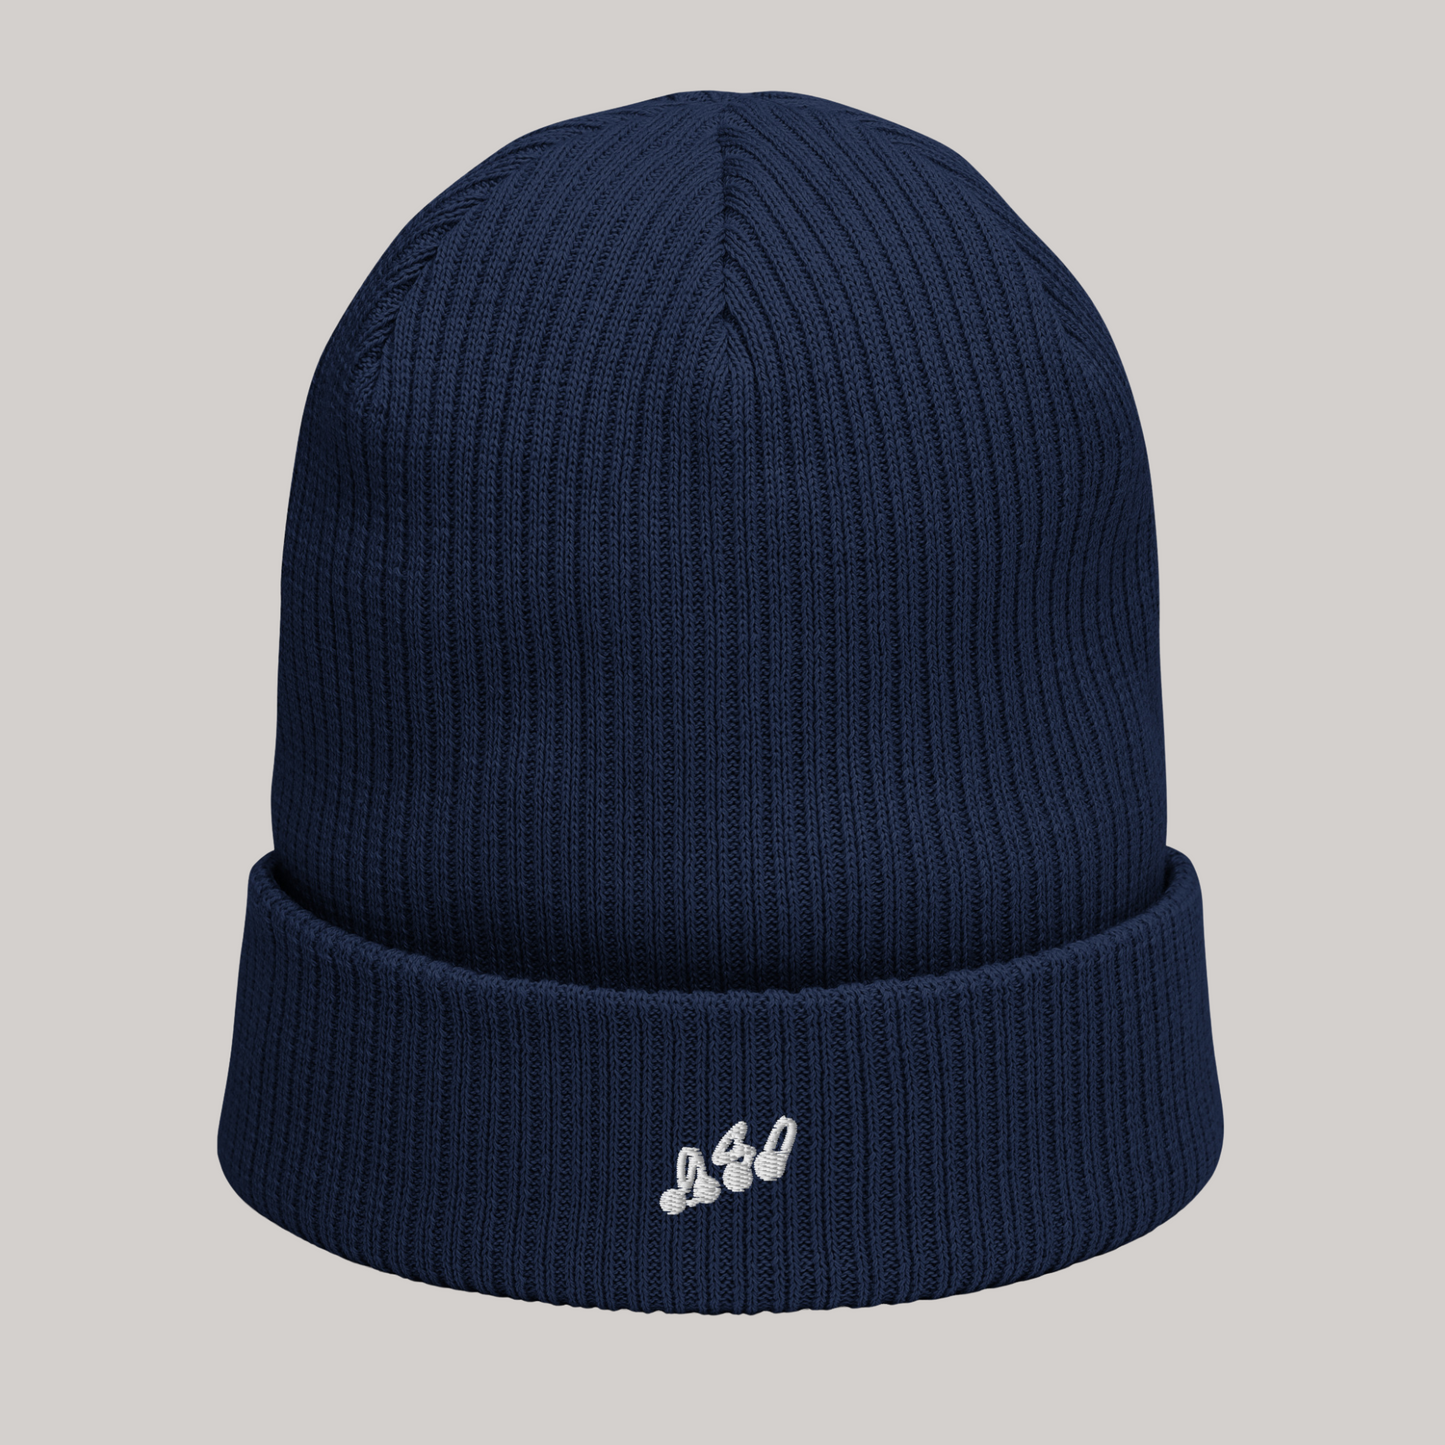 basic oxford navy blue ribbed beanie with embroidered patch 980 headgear streetwear accessorybasic oxford navy blue ribbed beanie with embroidered patch 980 headgear streetwear accessory